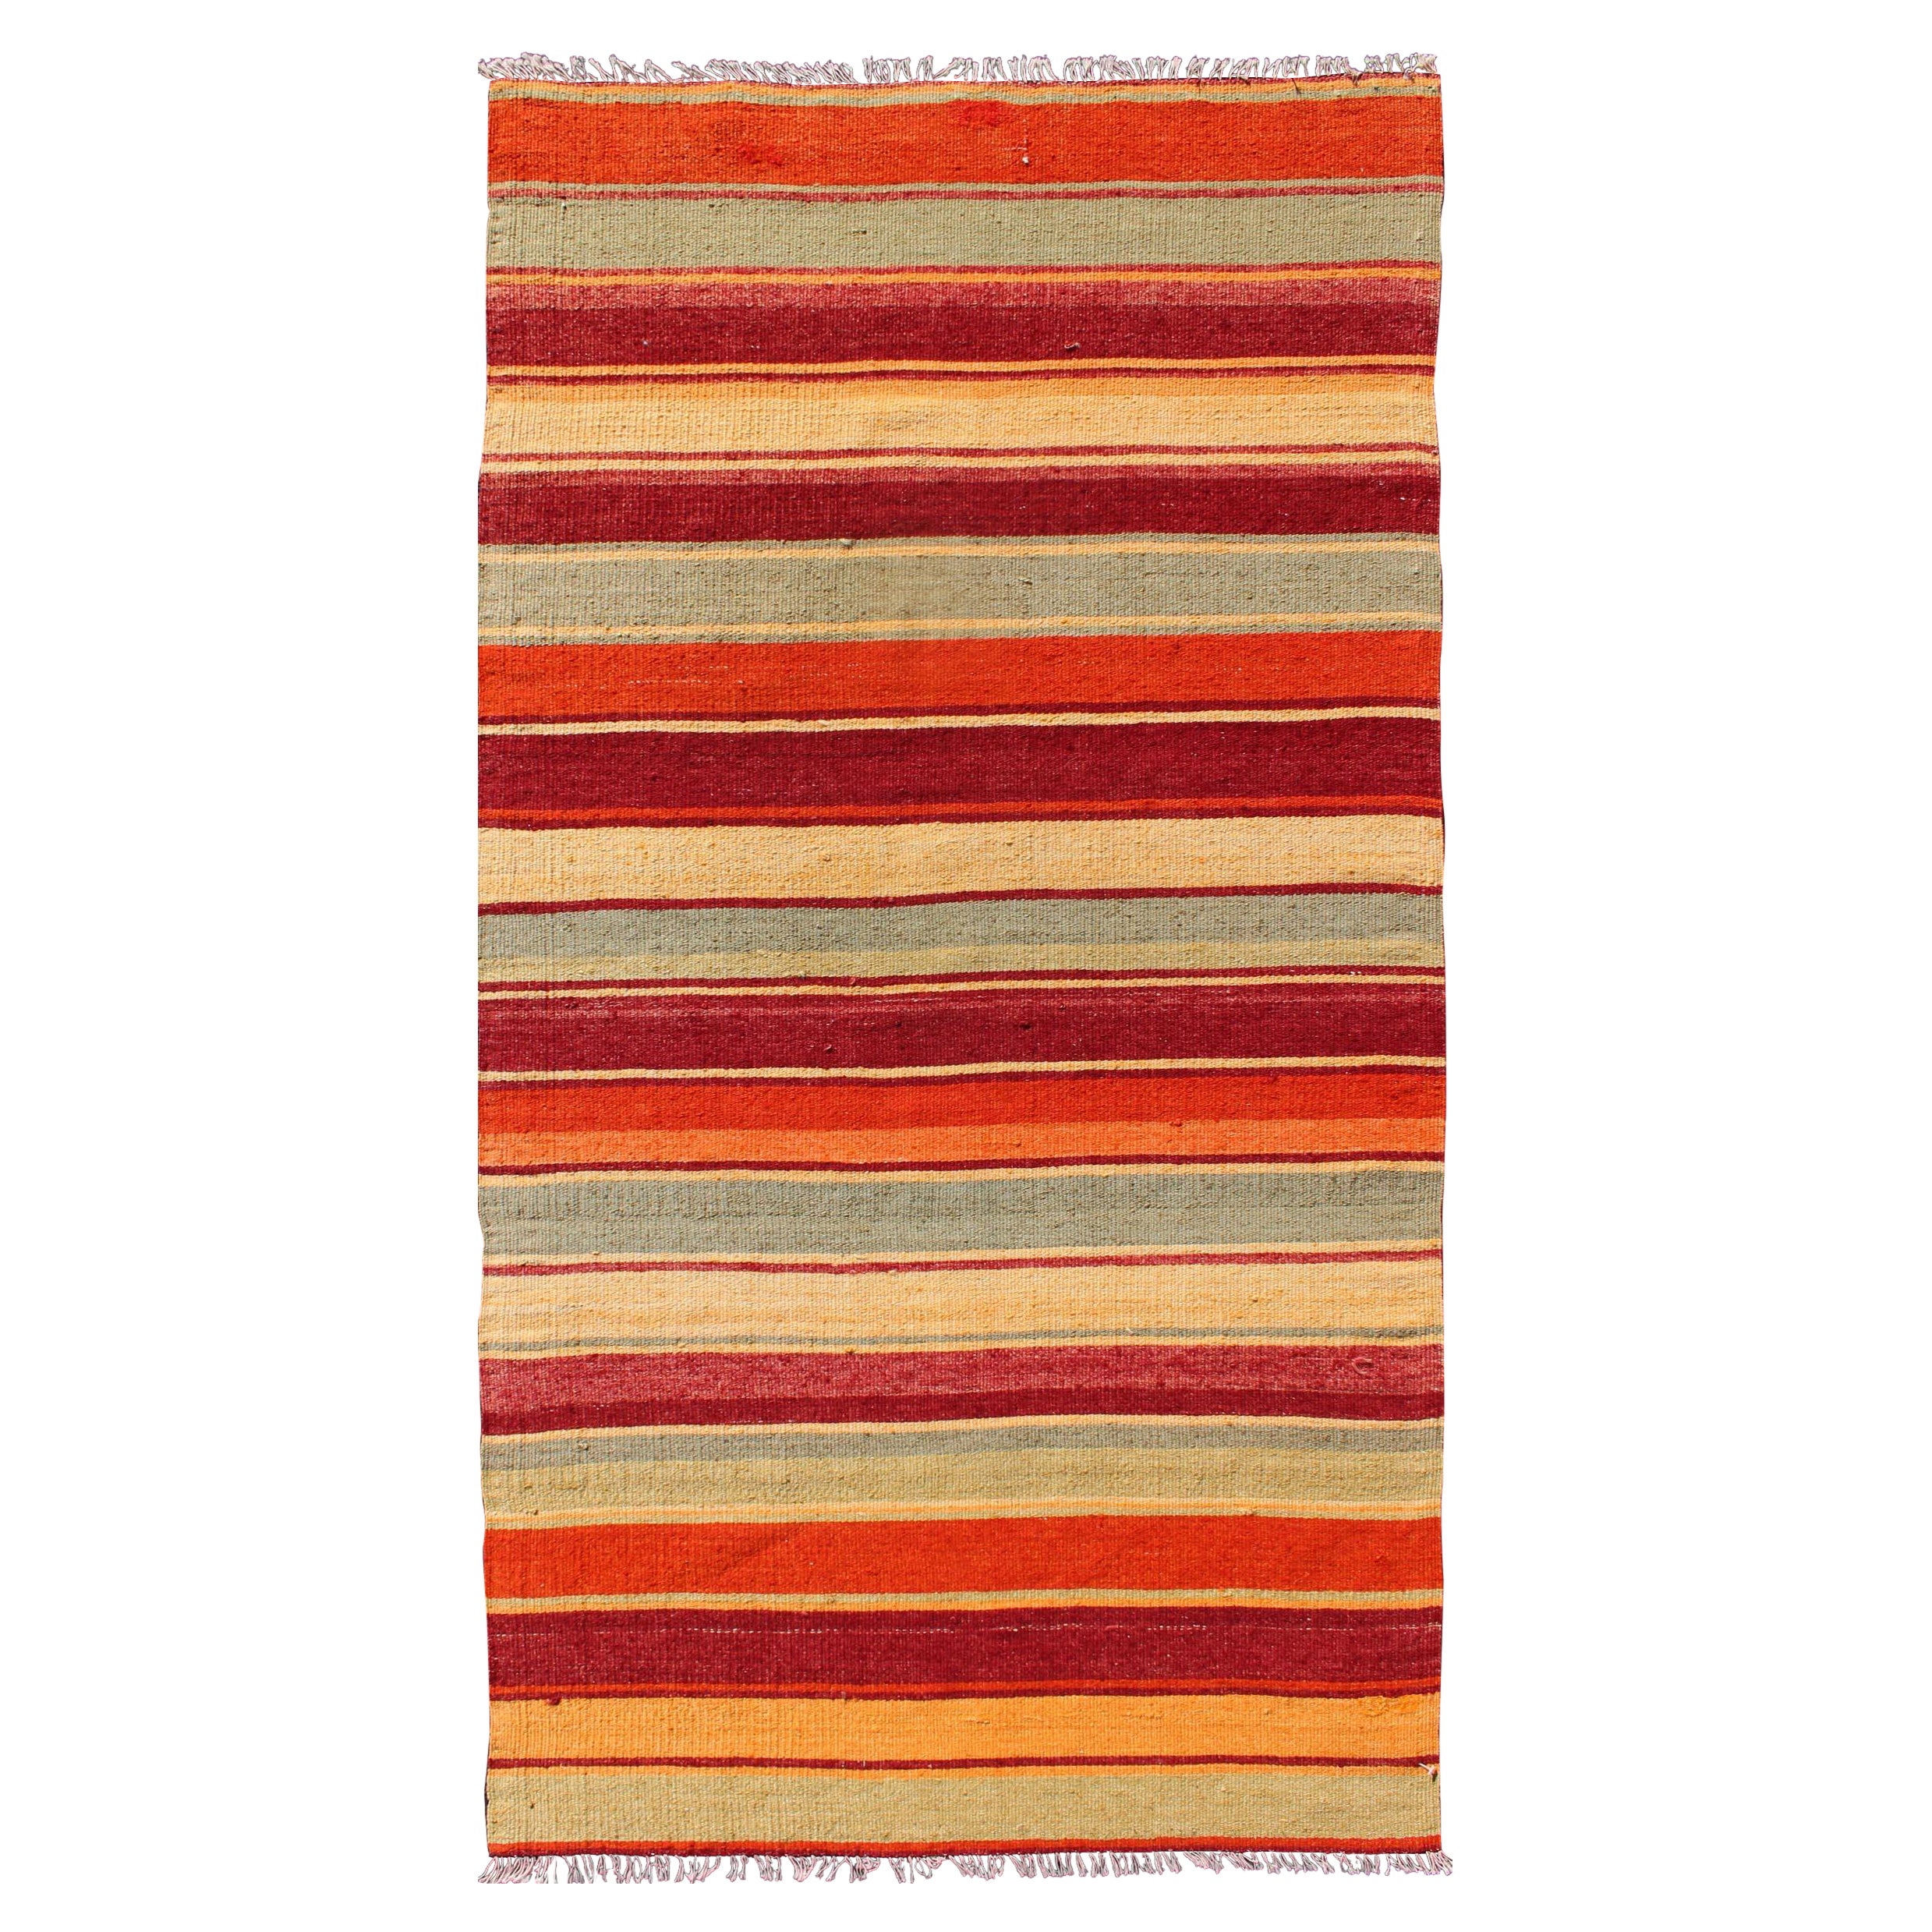 Vintage Turkish Kilim Runner with Stripes in Red, Green, Yellow, and Orange For Sale